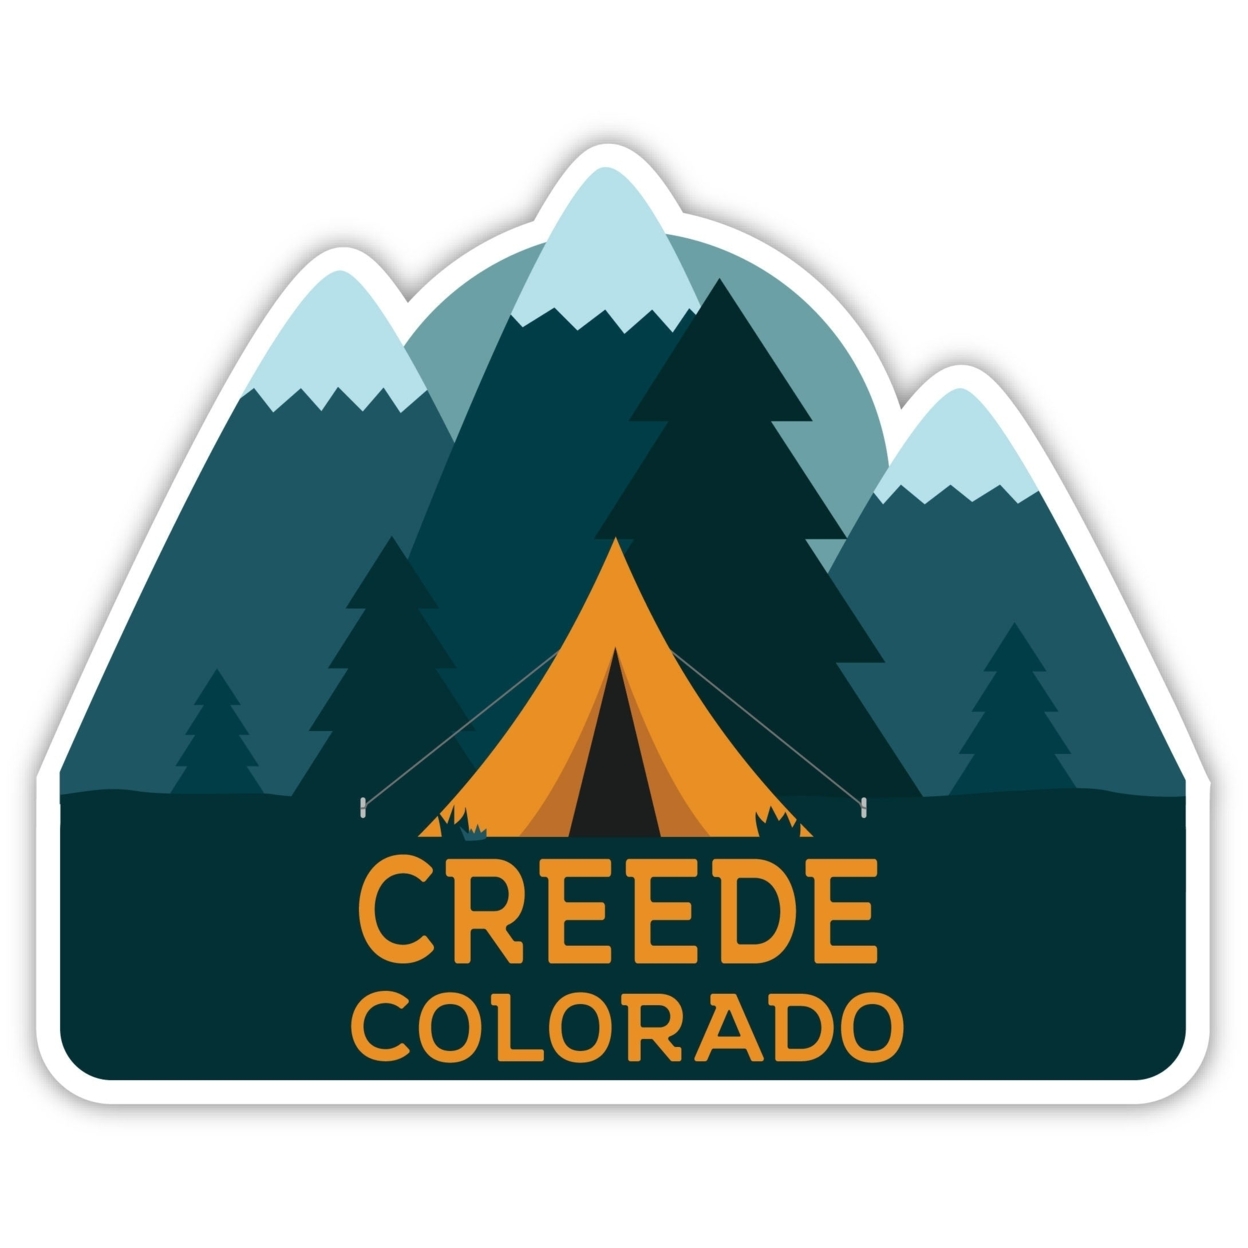 Creede Colorado Souvenir Decorative Stickers (Choose Theme And Size) - 4-Pack, 10-Inch, Tent